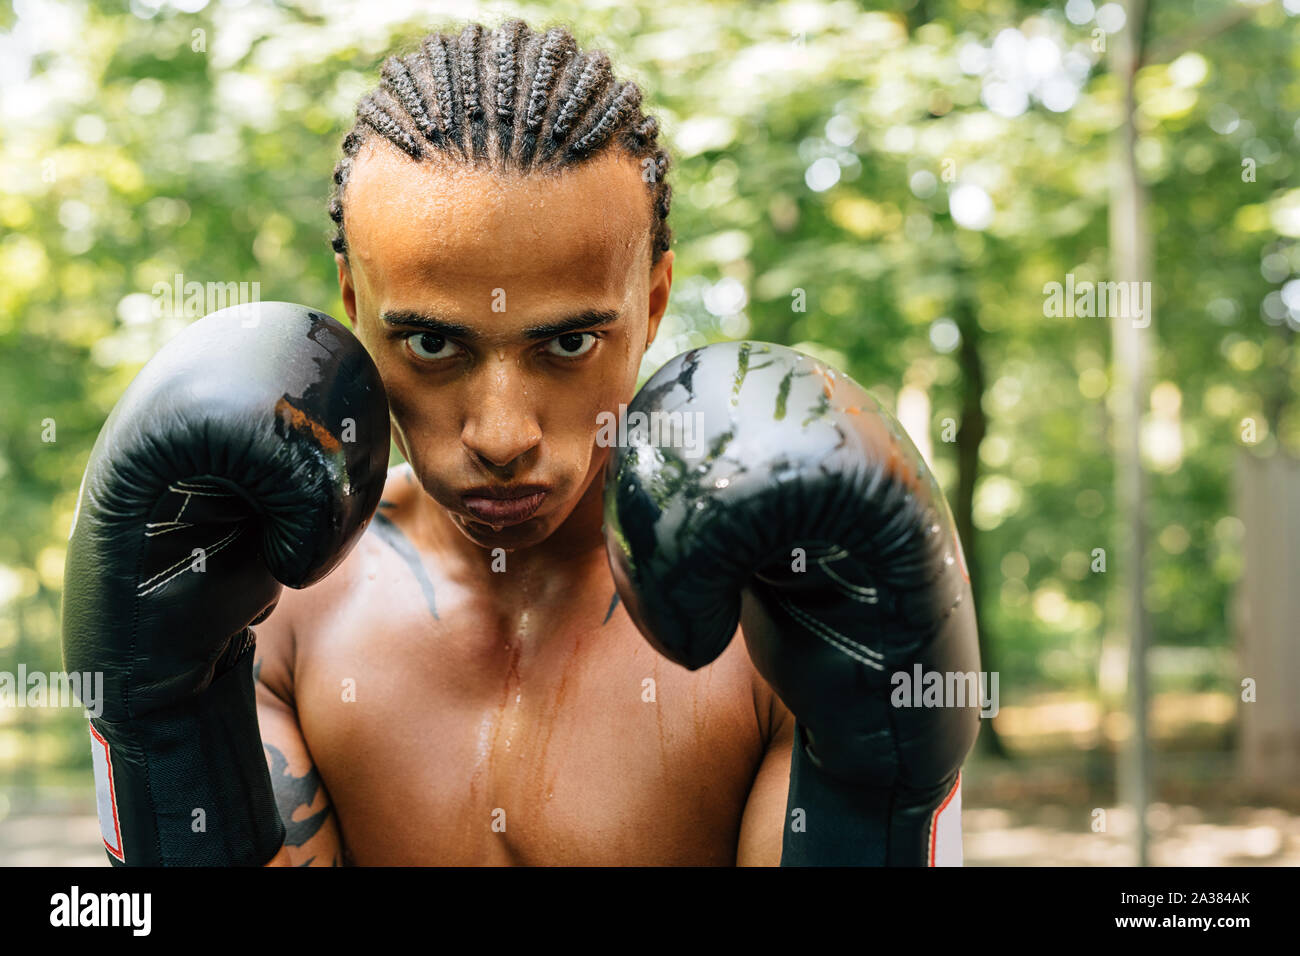 Sweated male boxer with mouth guard looking at camera while standing on sports ground outdoors Stock Photo